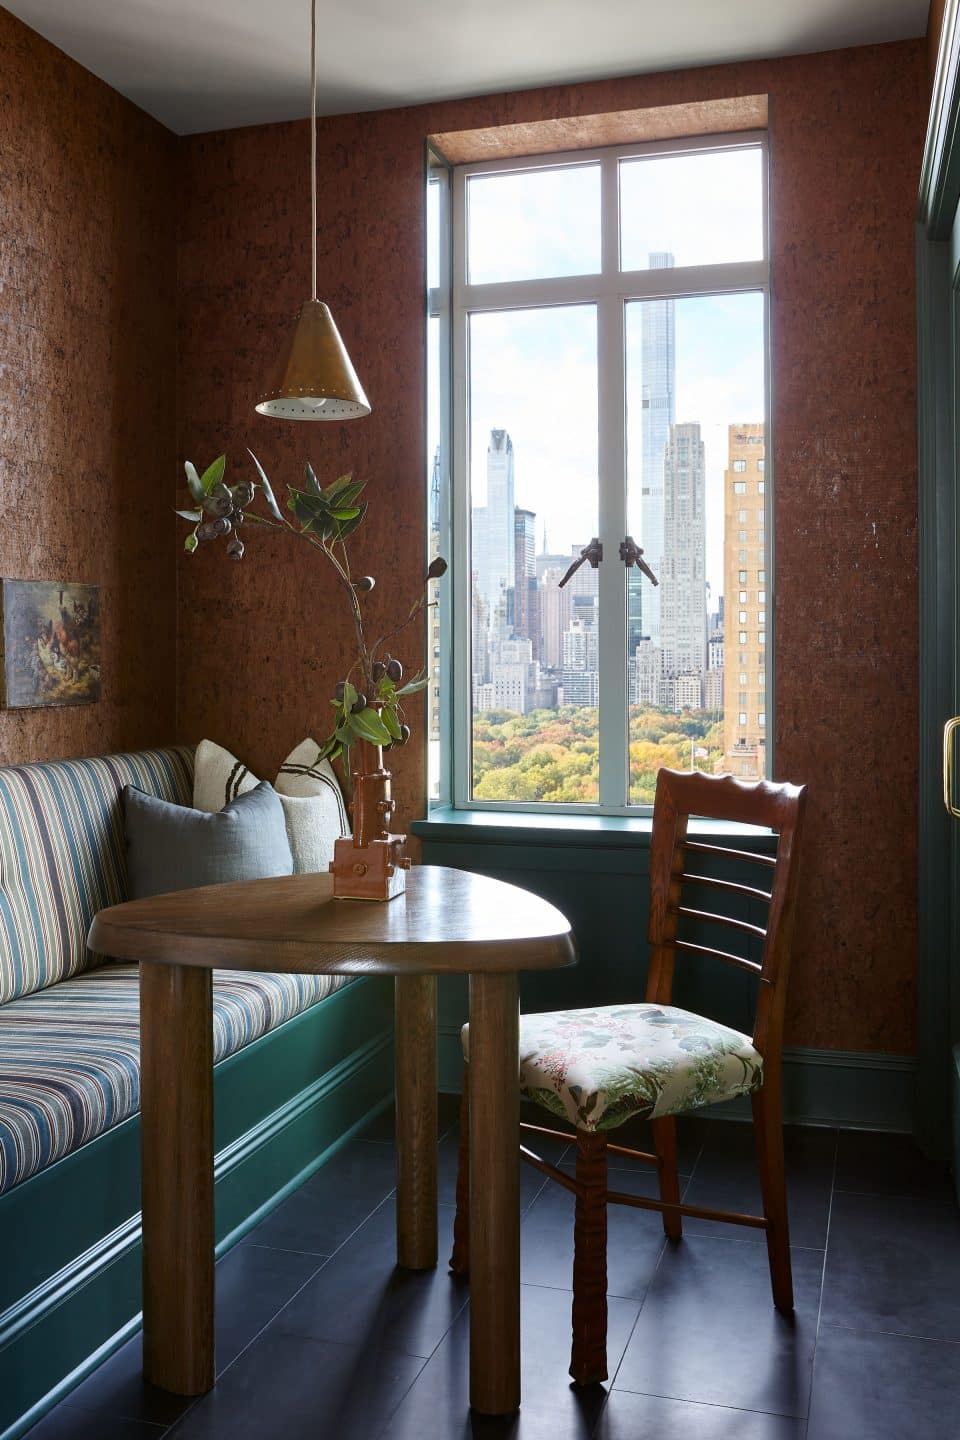 In a Historic Manhattan Apartment Building, Katch Crafted Interiors as only Katch Can